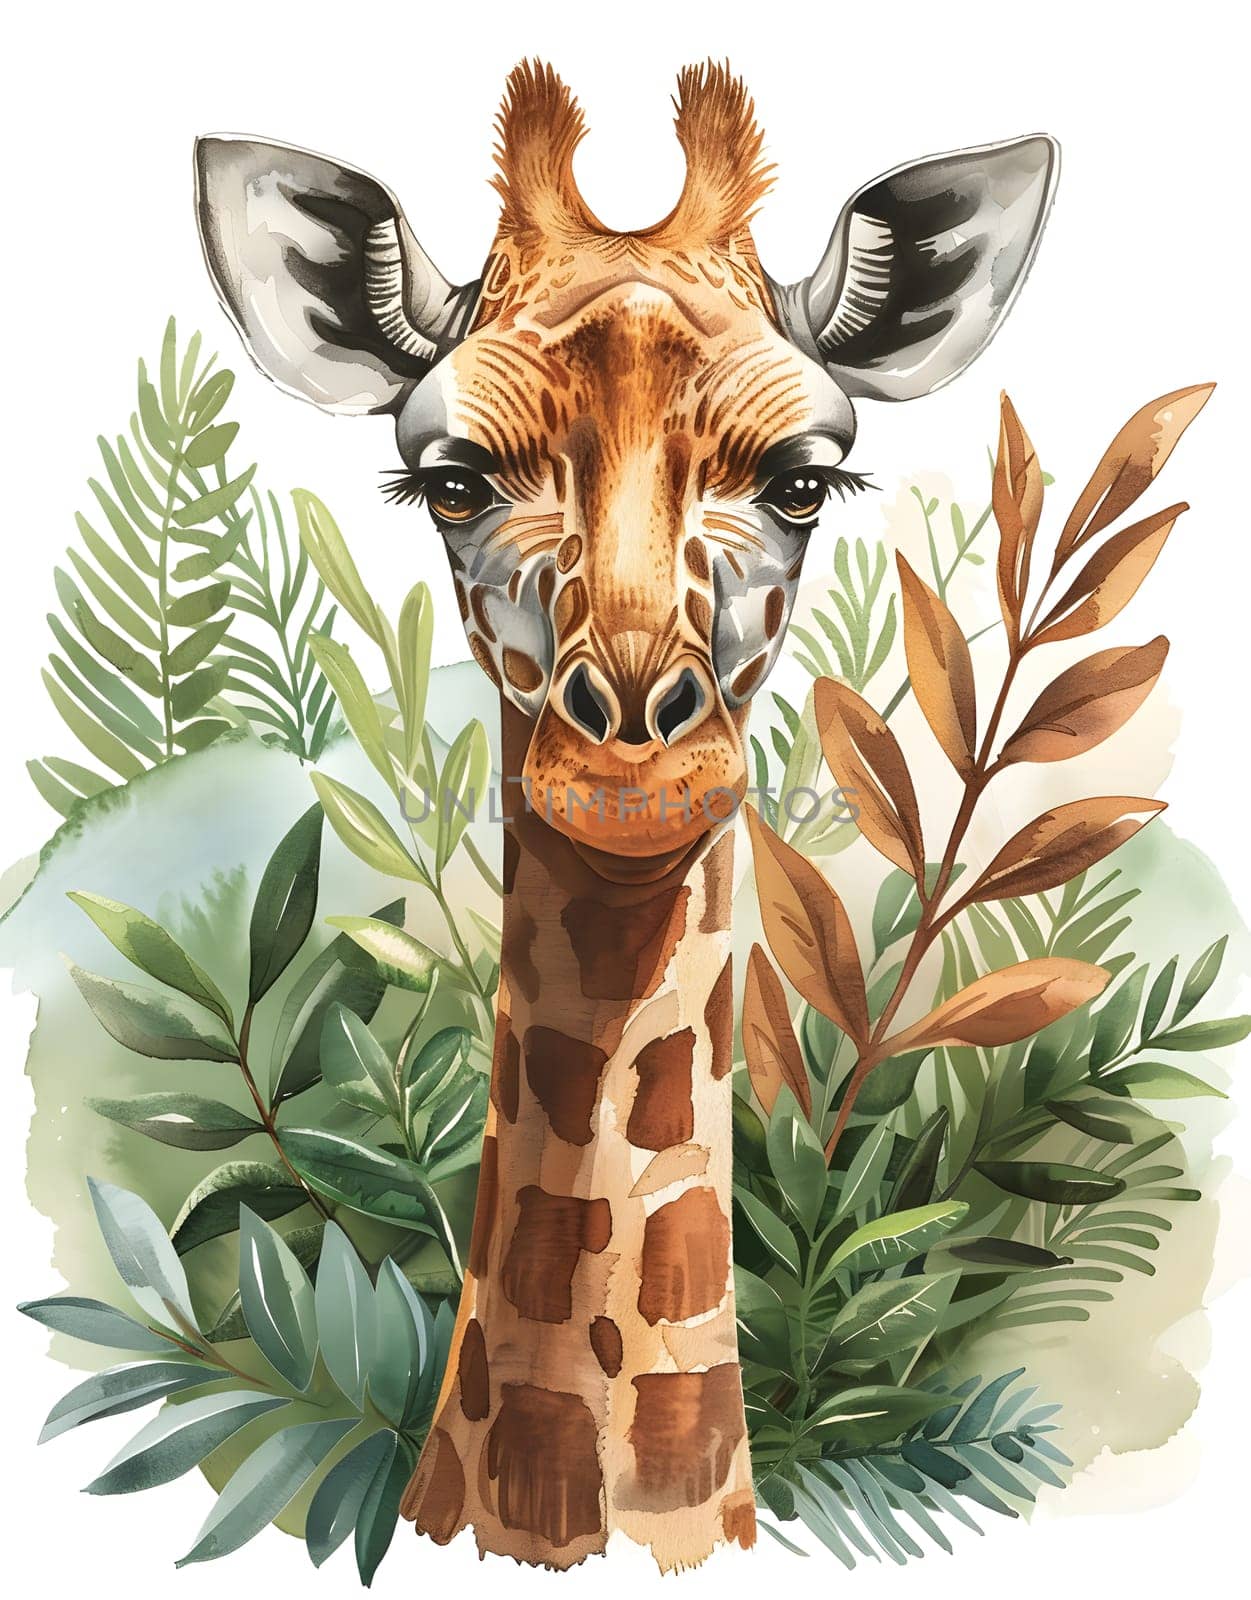 Giraffidae surrounded by leaves in an artistic illustration by Nadtochiy